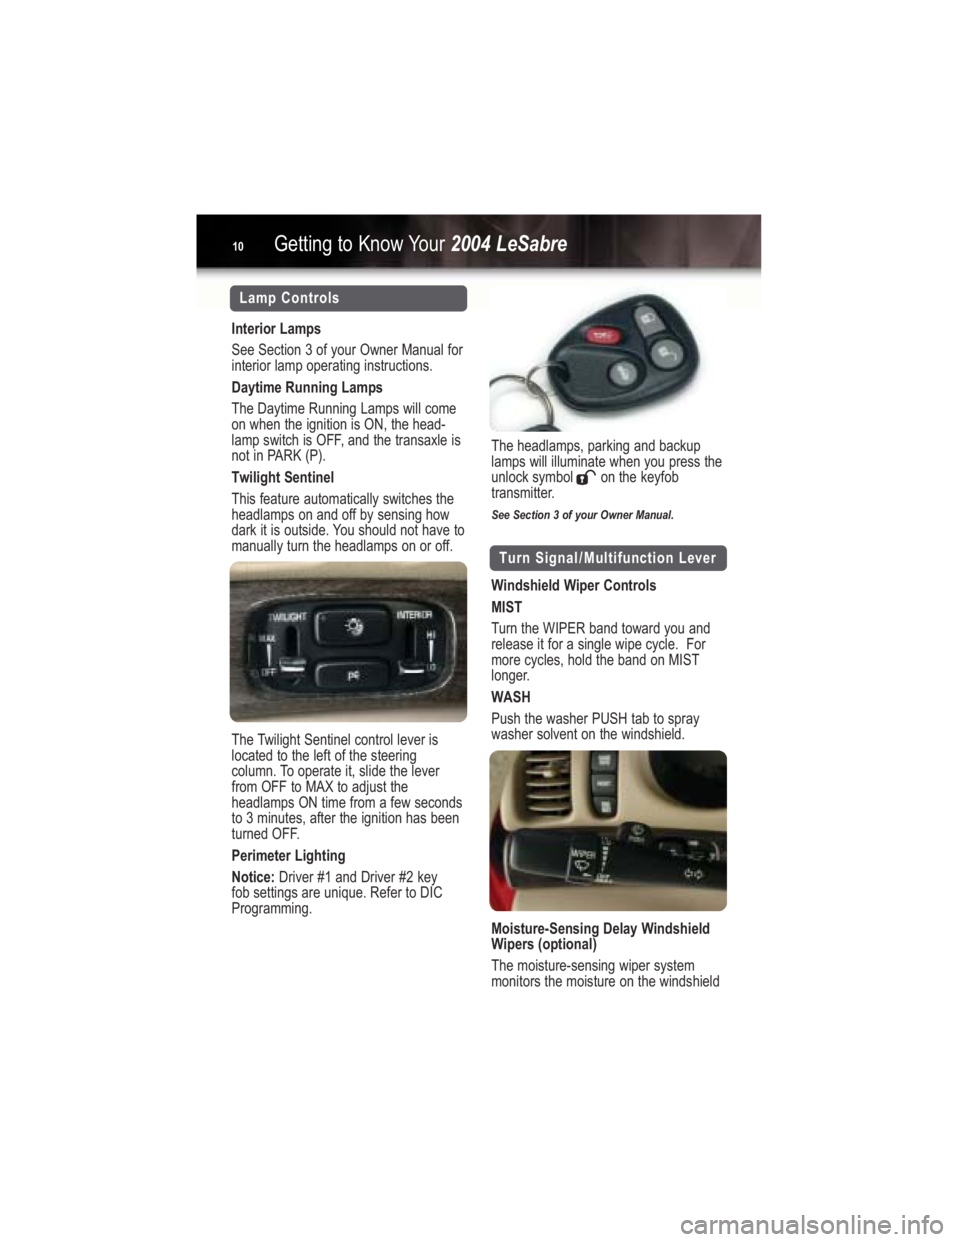 BUICK LESABRE 2004  Get To Know Guide Turn Signal/Multifunction Lever
Windshield Wiper Controls
MIST
Turn the WIPER band toward you and
release it for a single wipe cycle.  For
more cycles, hold the band on MIST
longer.
WASH
Push the wash